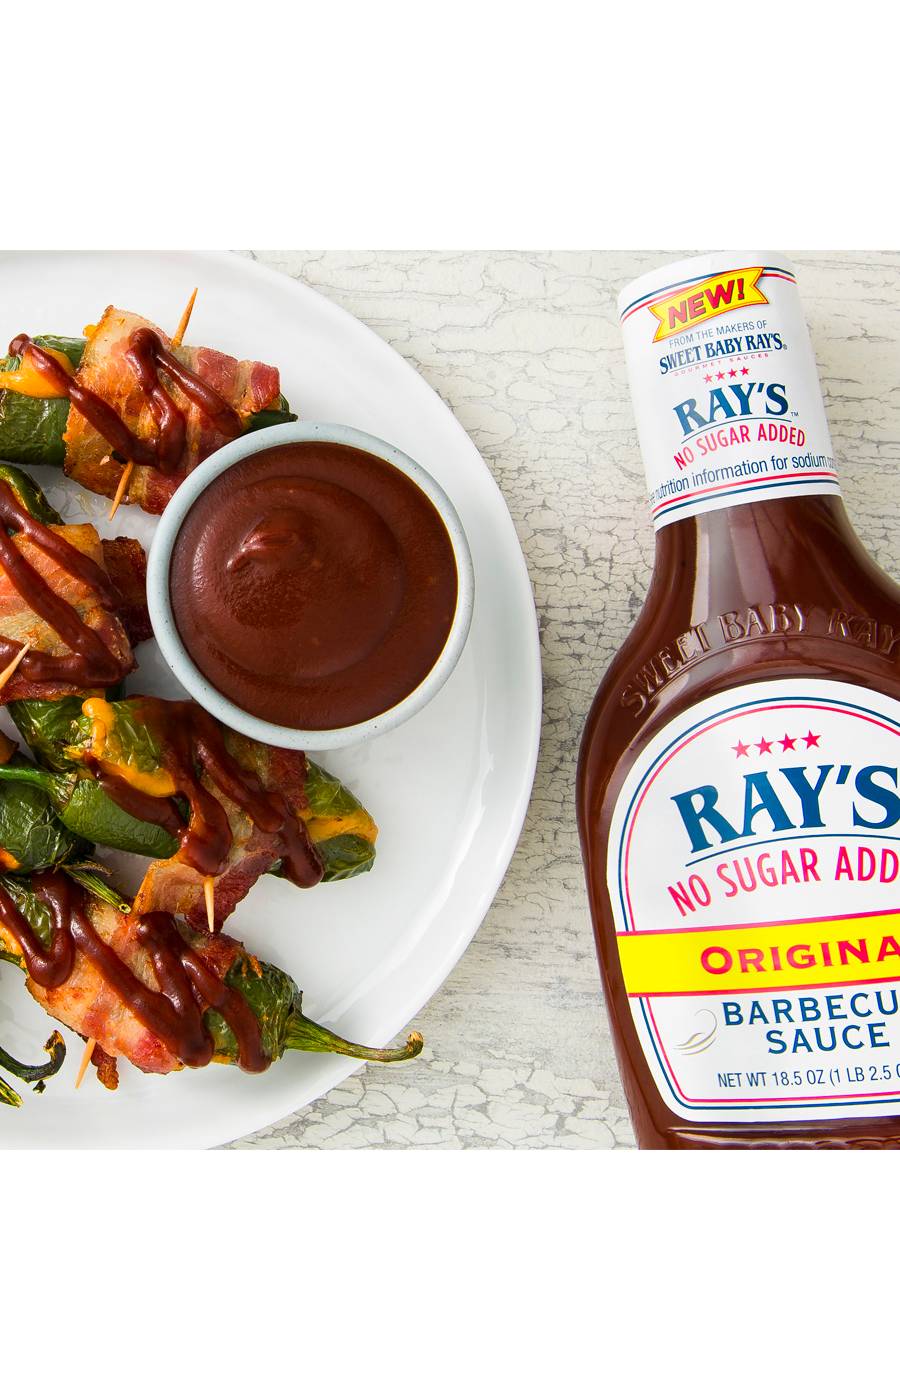 Sweet Baby Ray's No Sugar Added Original Barbecue Sauce; image 2 of 3